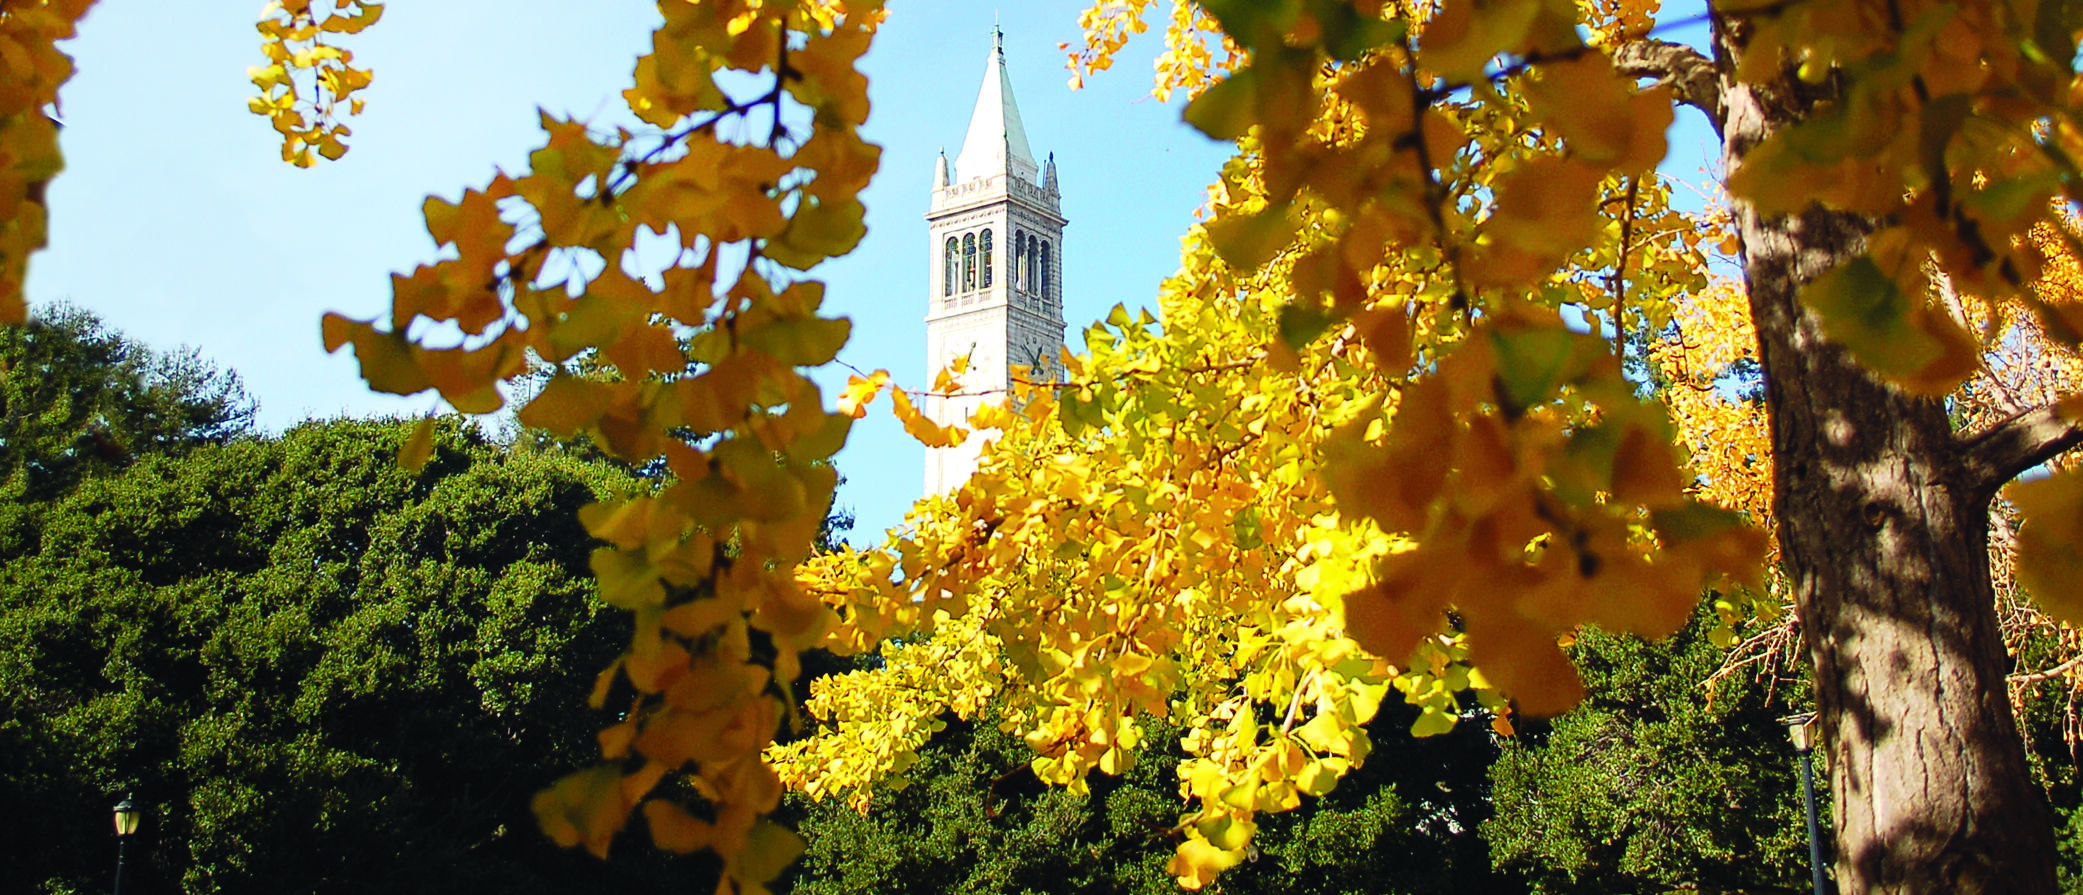 The campanile is in the background, surrounded by golden and orange leaves in the foreground. Other green trees are the middle ground.